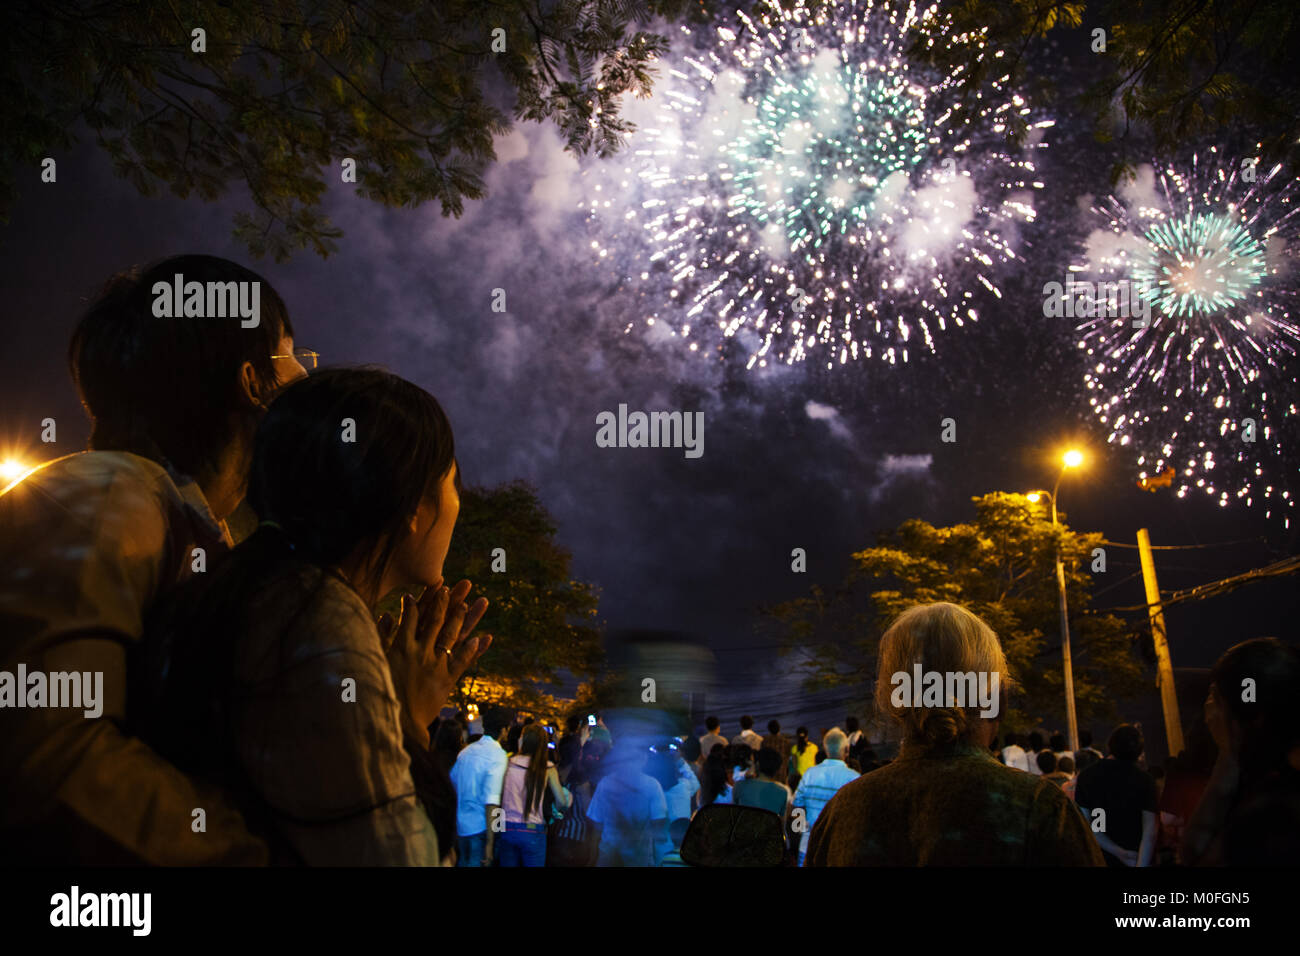 Vietnam - January 22, 2012: Viewers watching fireworks during the celebration of the Vietnamese New Year Stock Photo